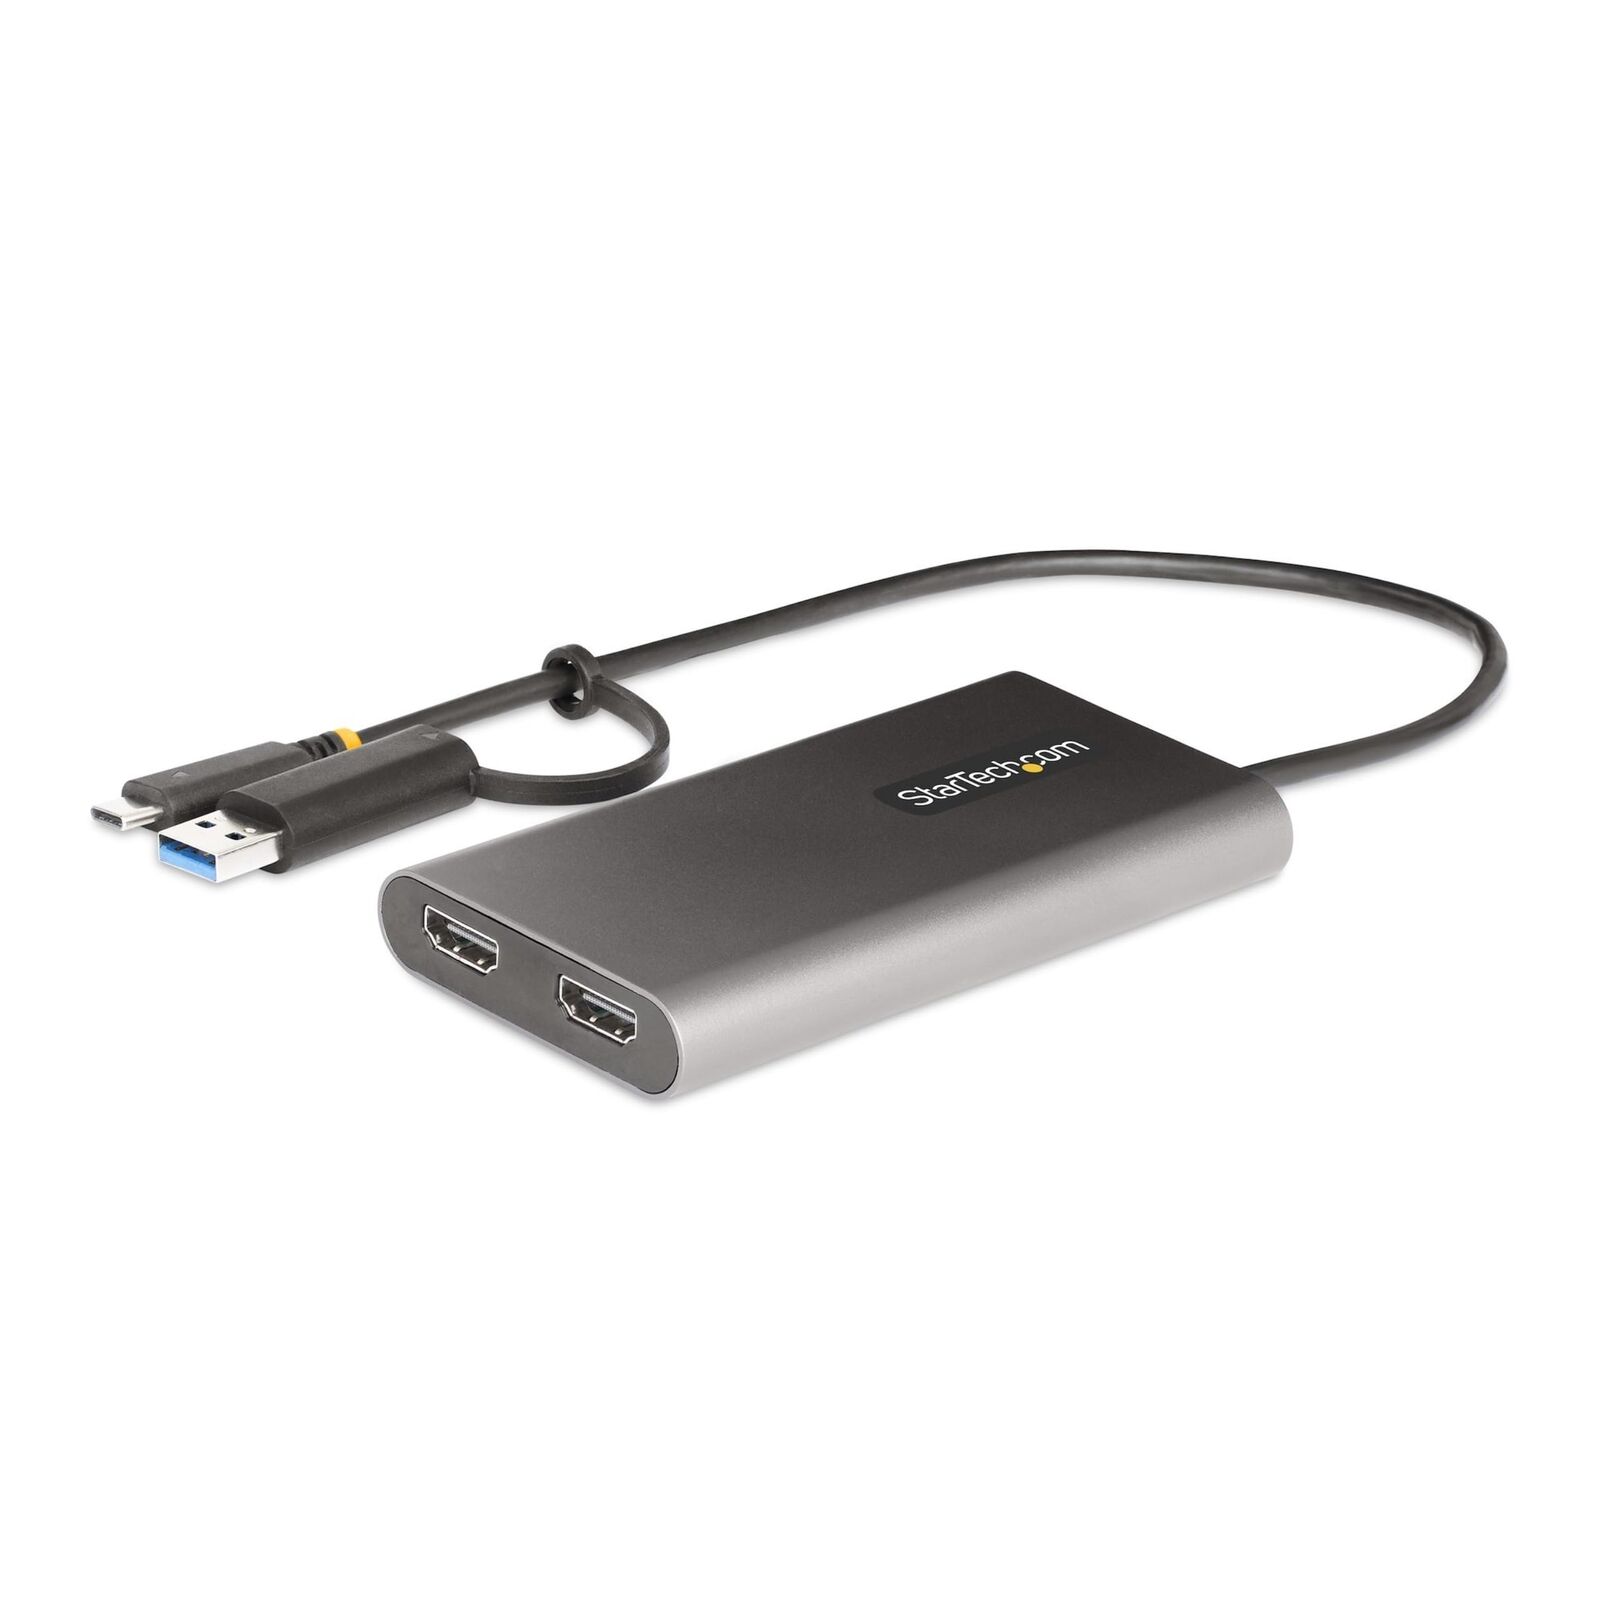 StarTech.com USB-C to Dual-HDMI Adapter - USB-C or A to 2x HDMI Monitors - 4K 60